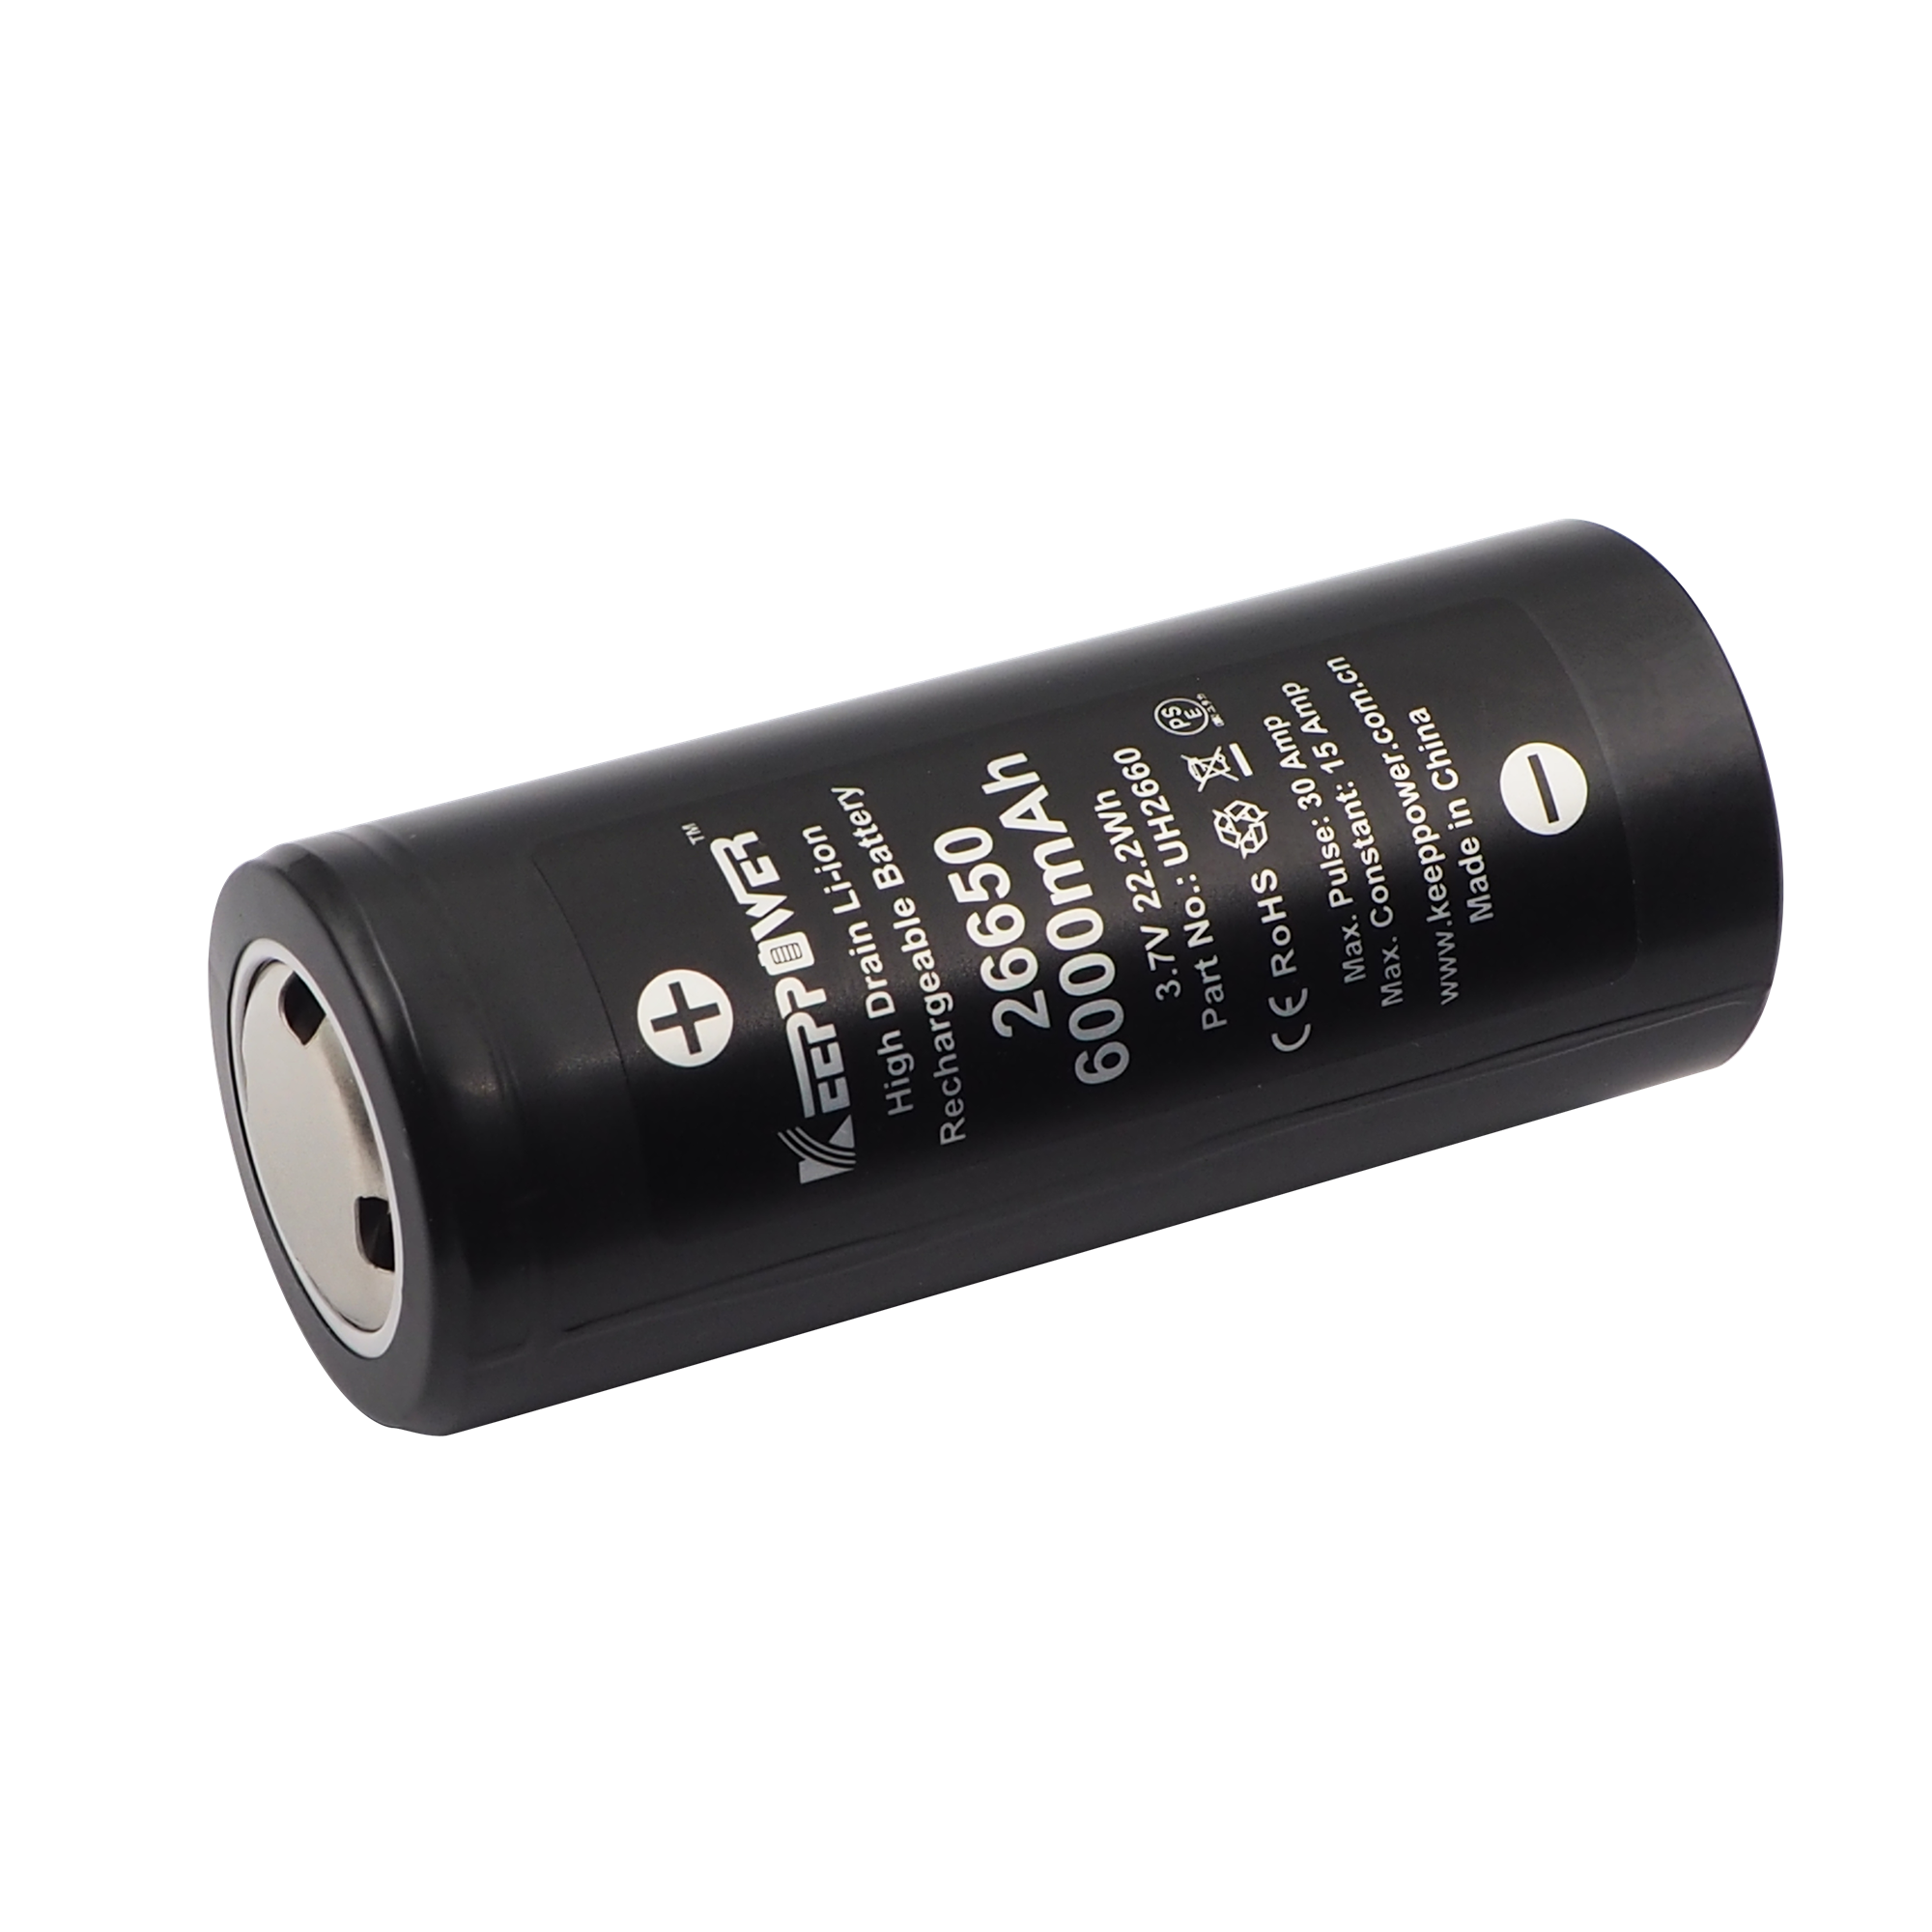 14500 3.7V 800mAh Rechargeable, Li-ion Battery, Button Top, UK Stock